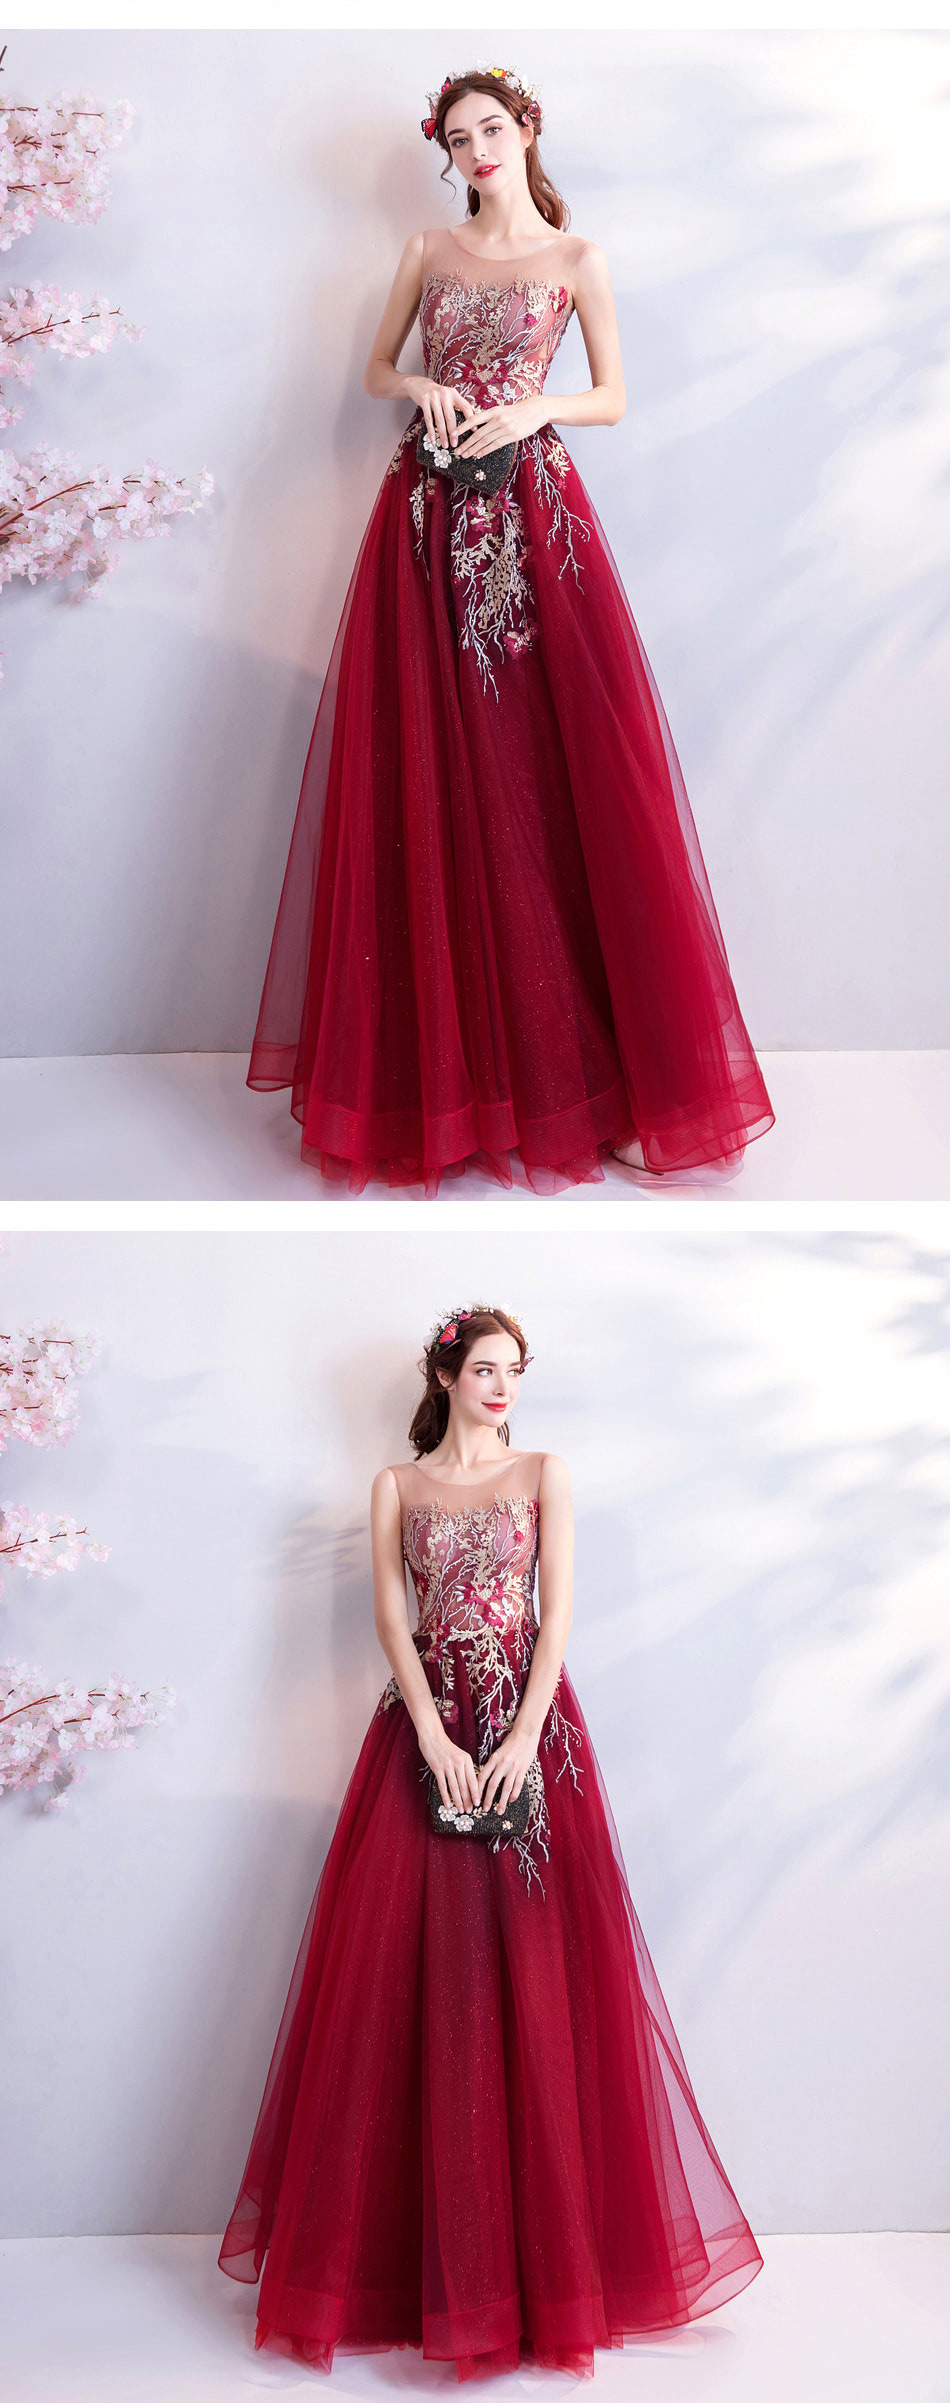 Gorgeous-Red-Couture-Dress-for-Wedding-Party-Prom-All-Occasions16.jpg